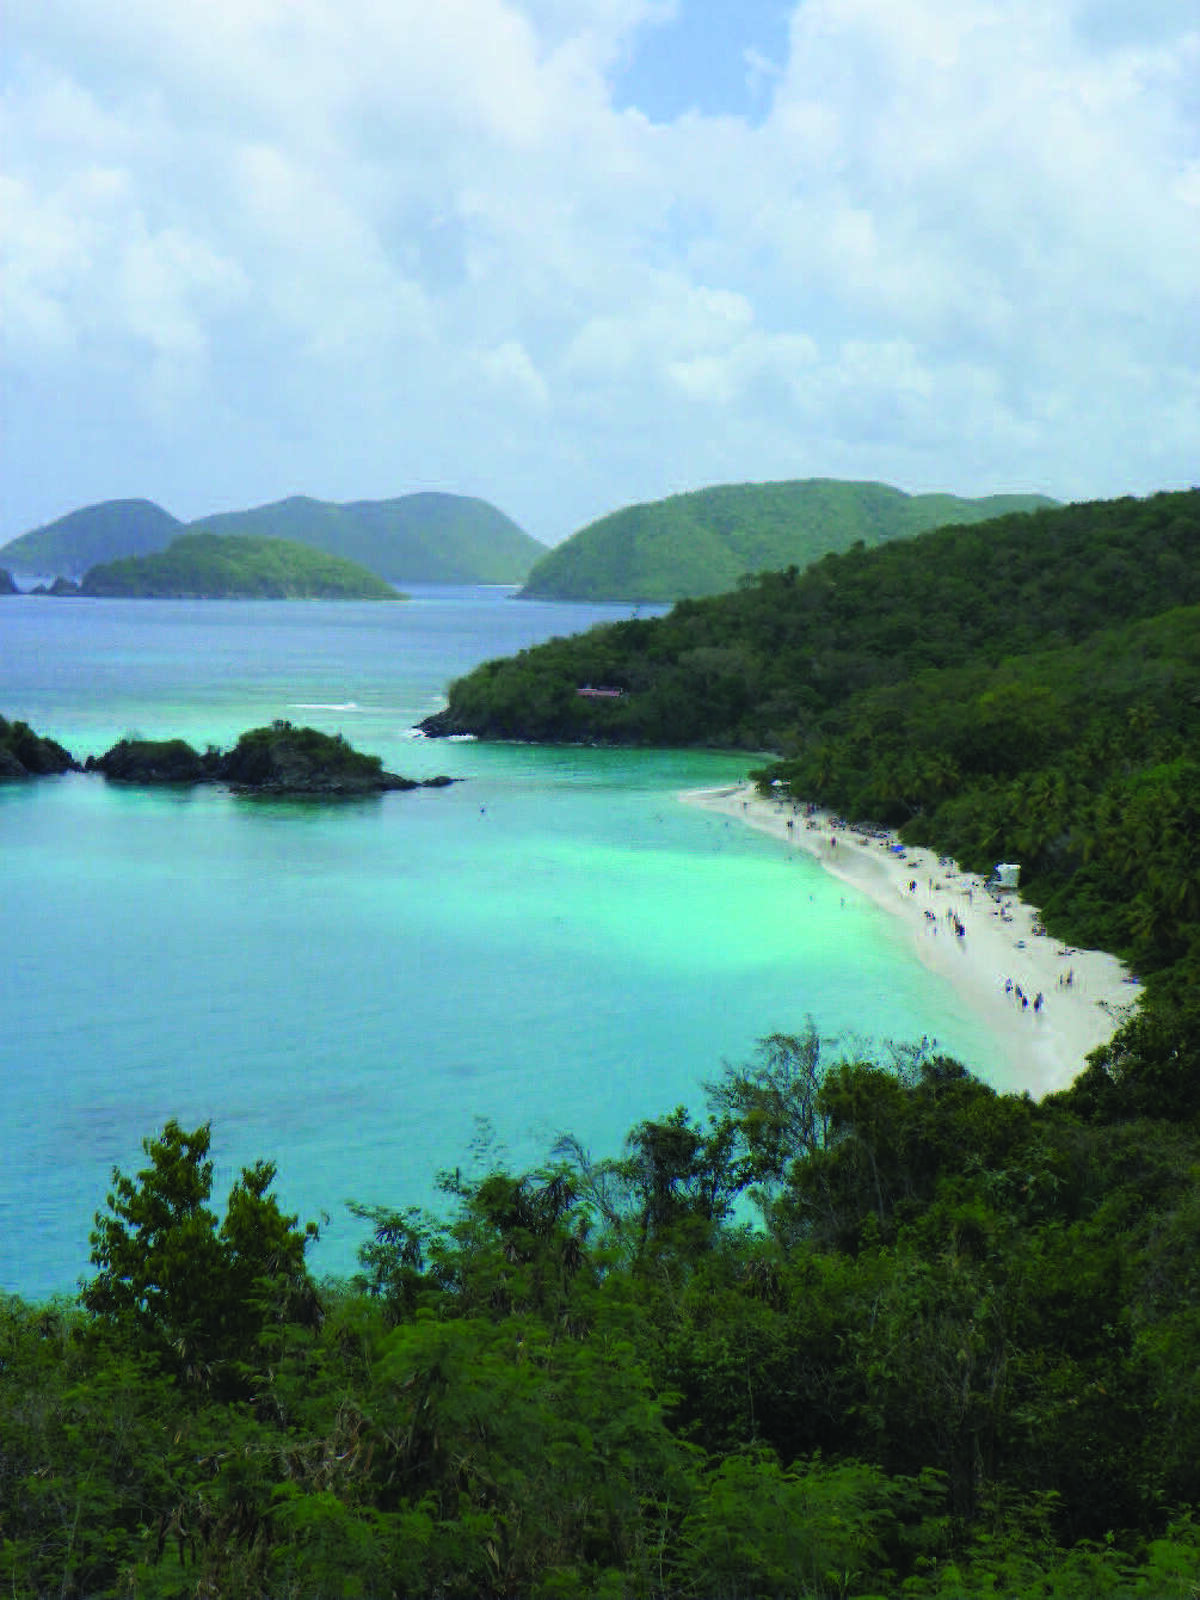 The turquoise water and white sandy beach of Trunk Bay can be enjoyed up close or from this overlook. Trunk Bay has one of the most popular beaches on the island of St. John. Below: Tropical plants surround the door to the Calypso Del Sol rental home in St. John.